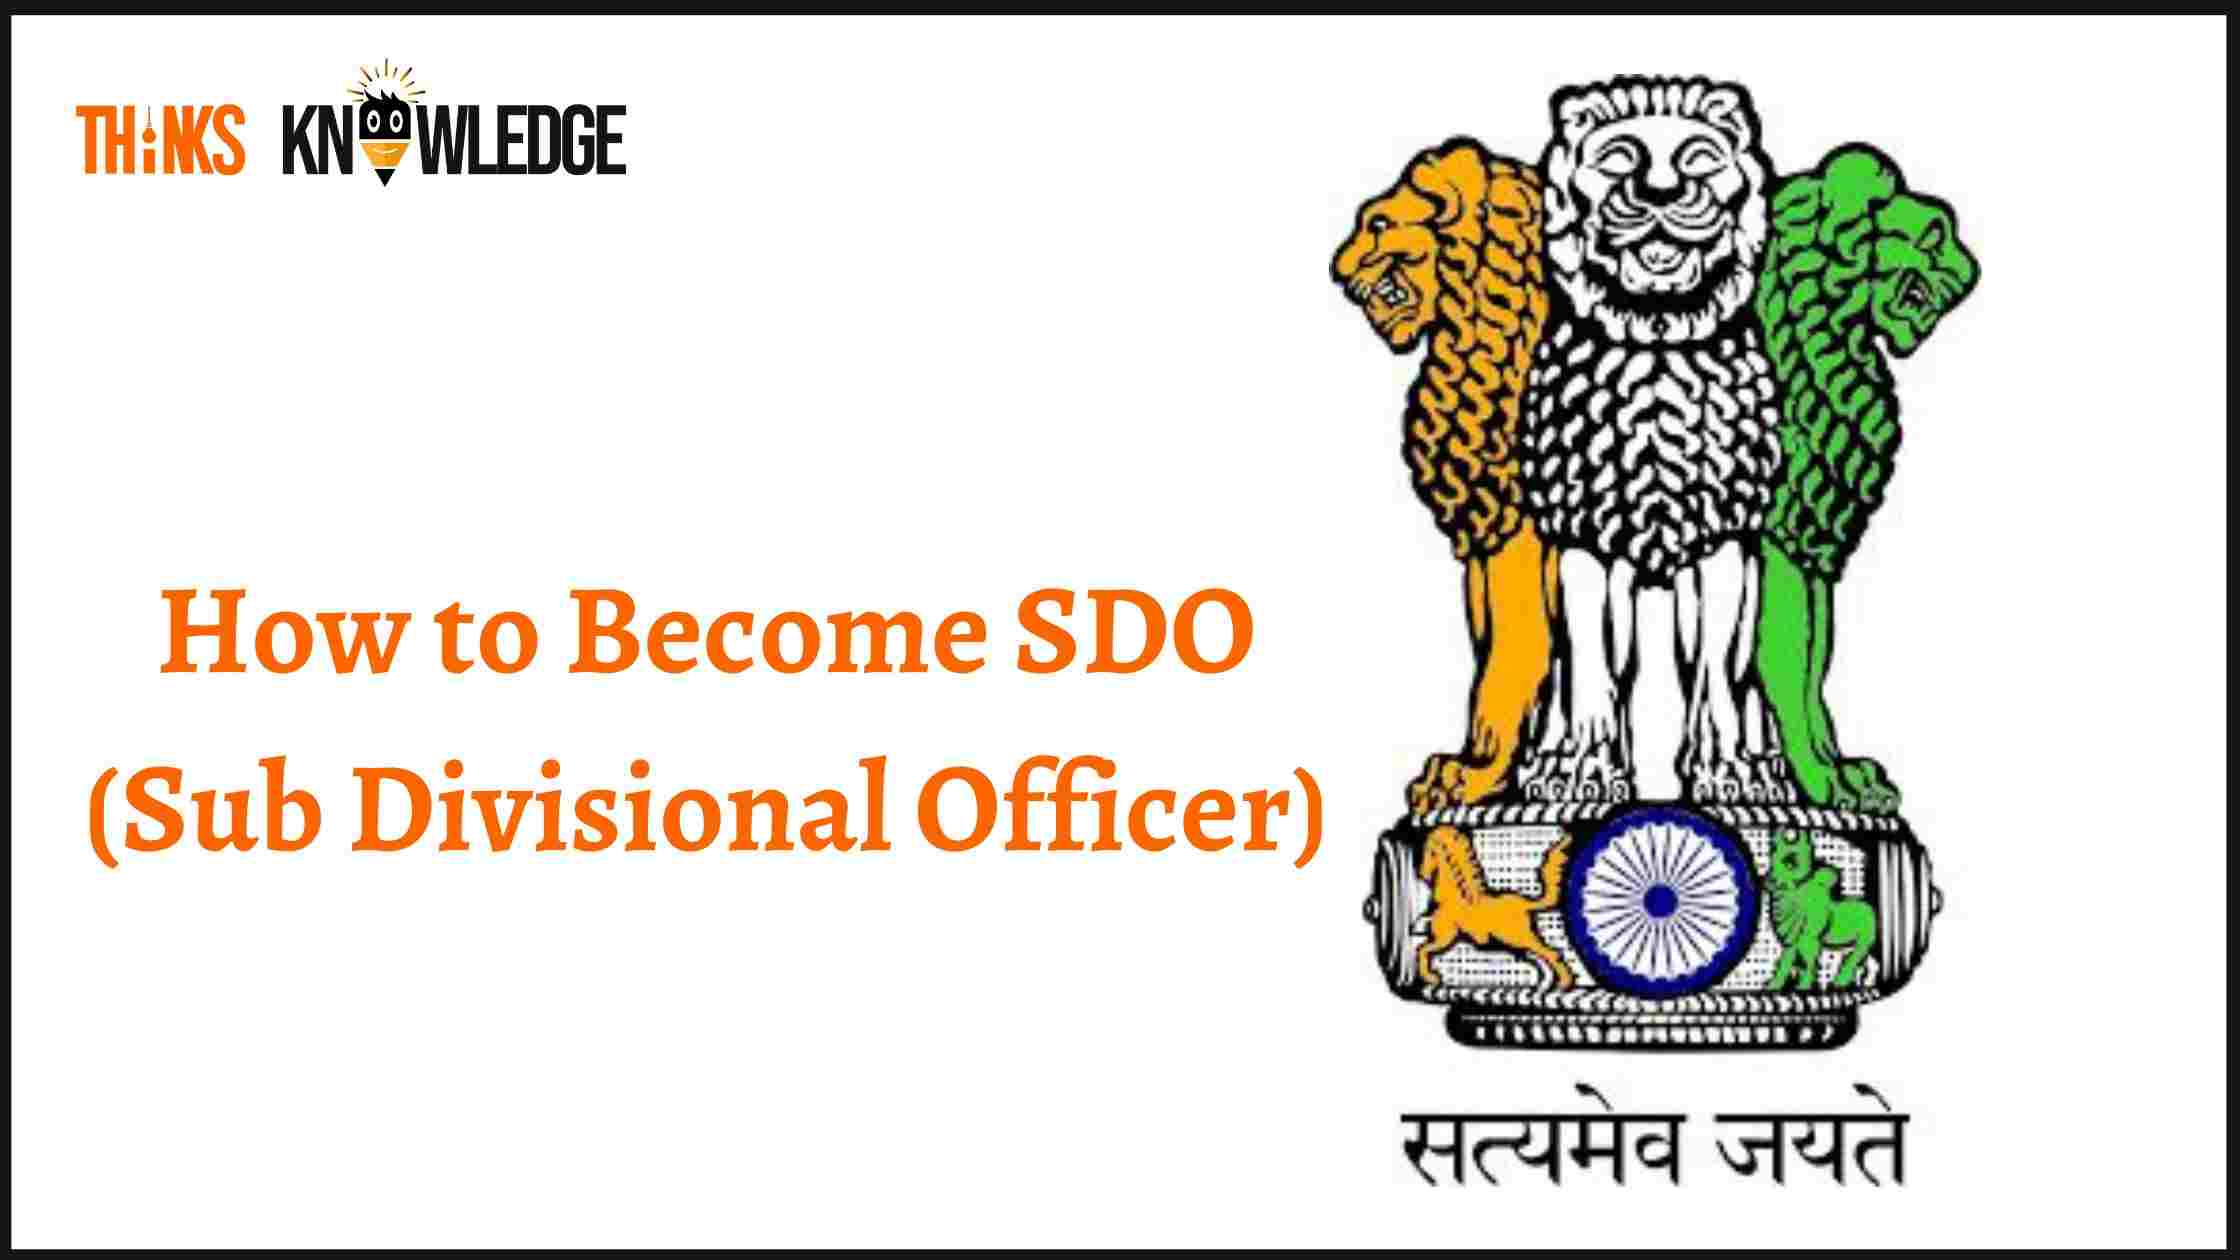 How to Become Sub Divisional Officer